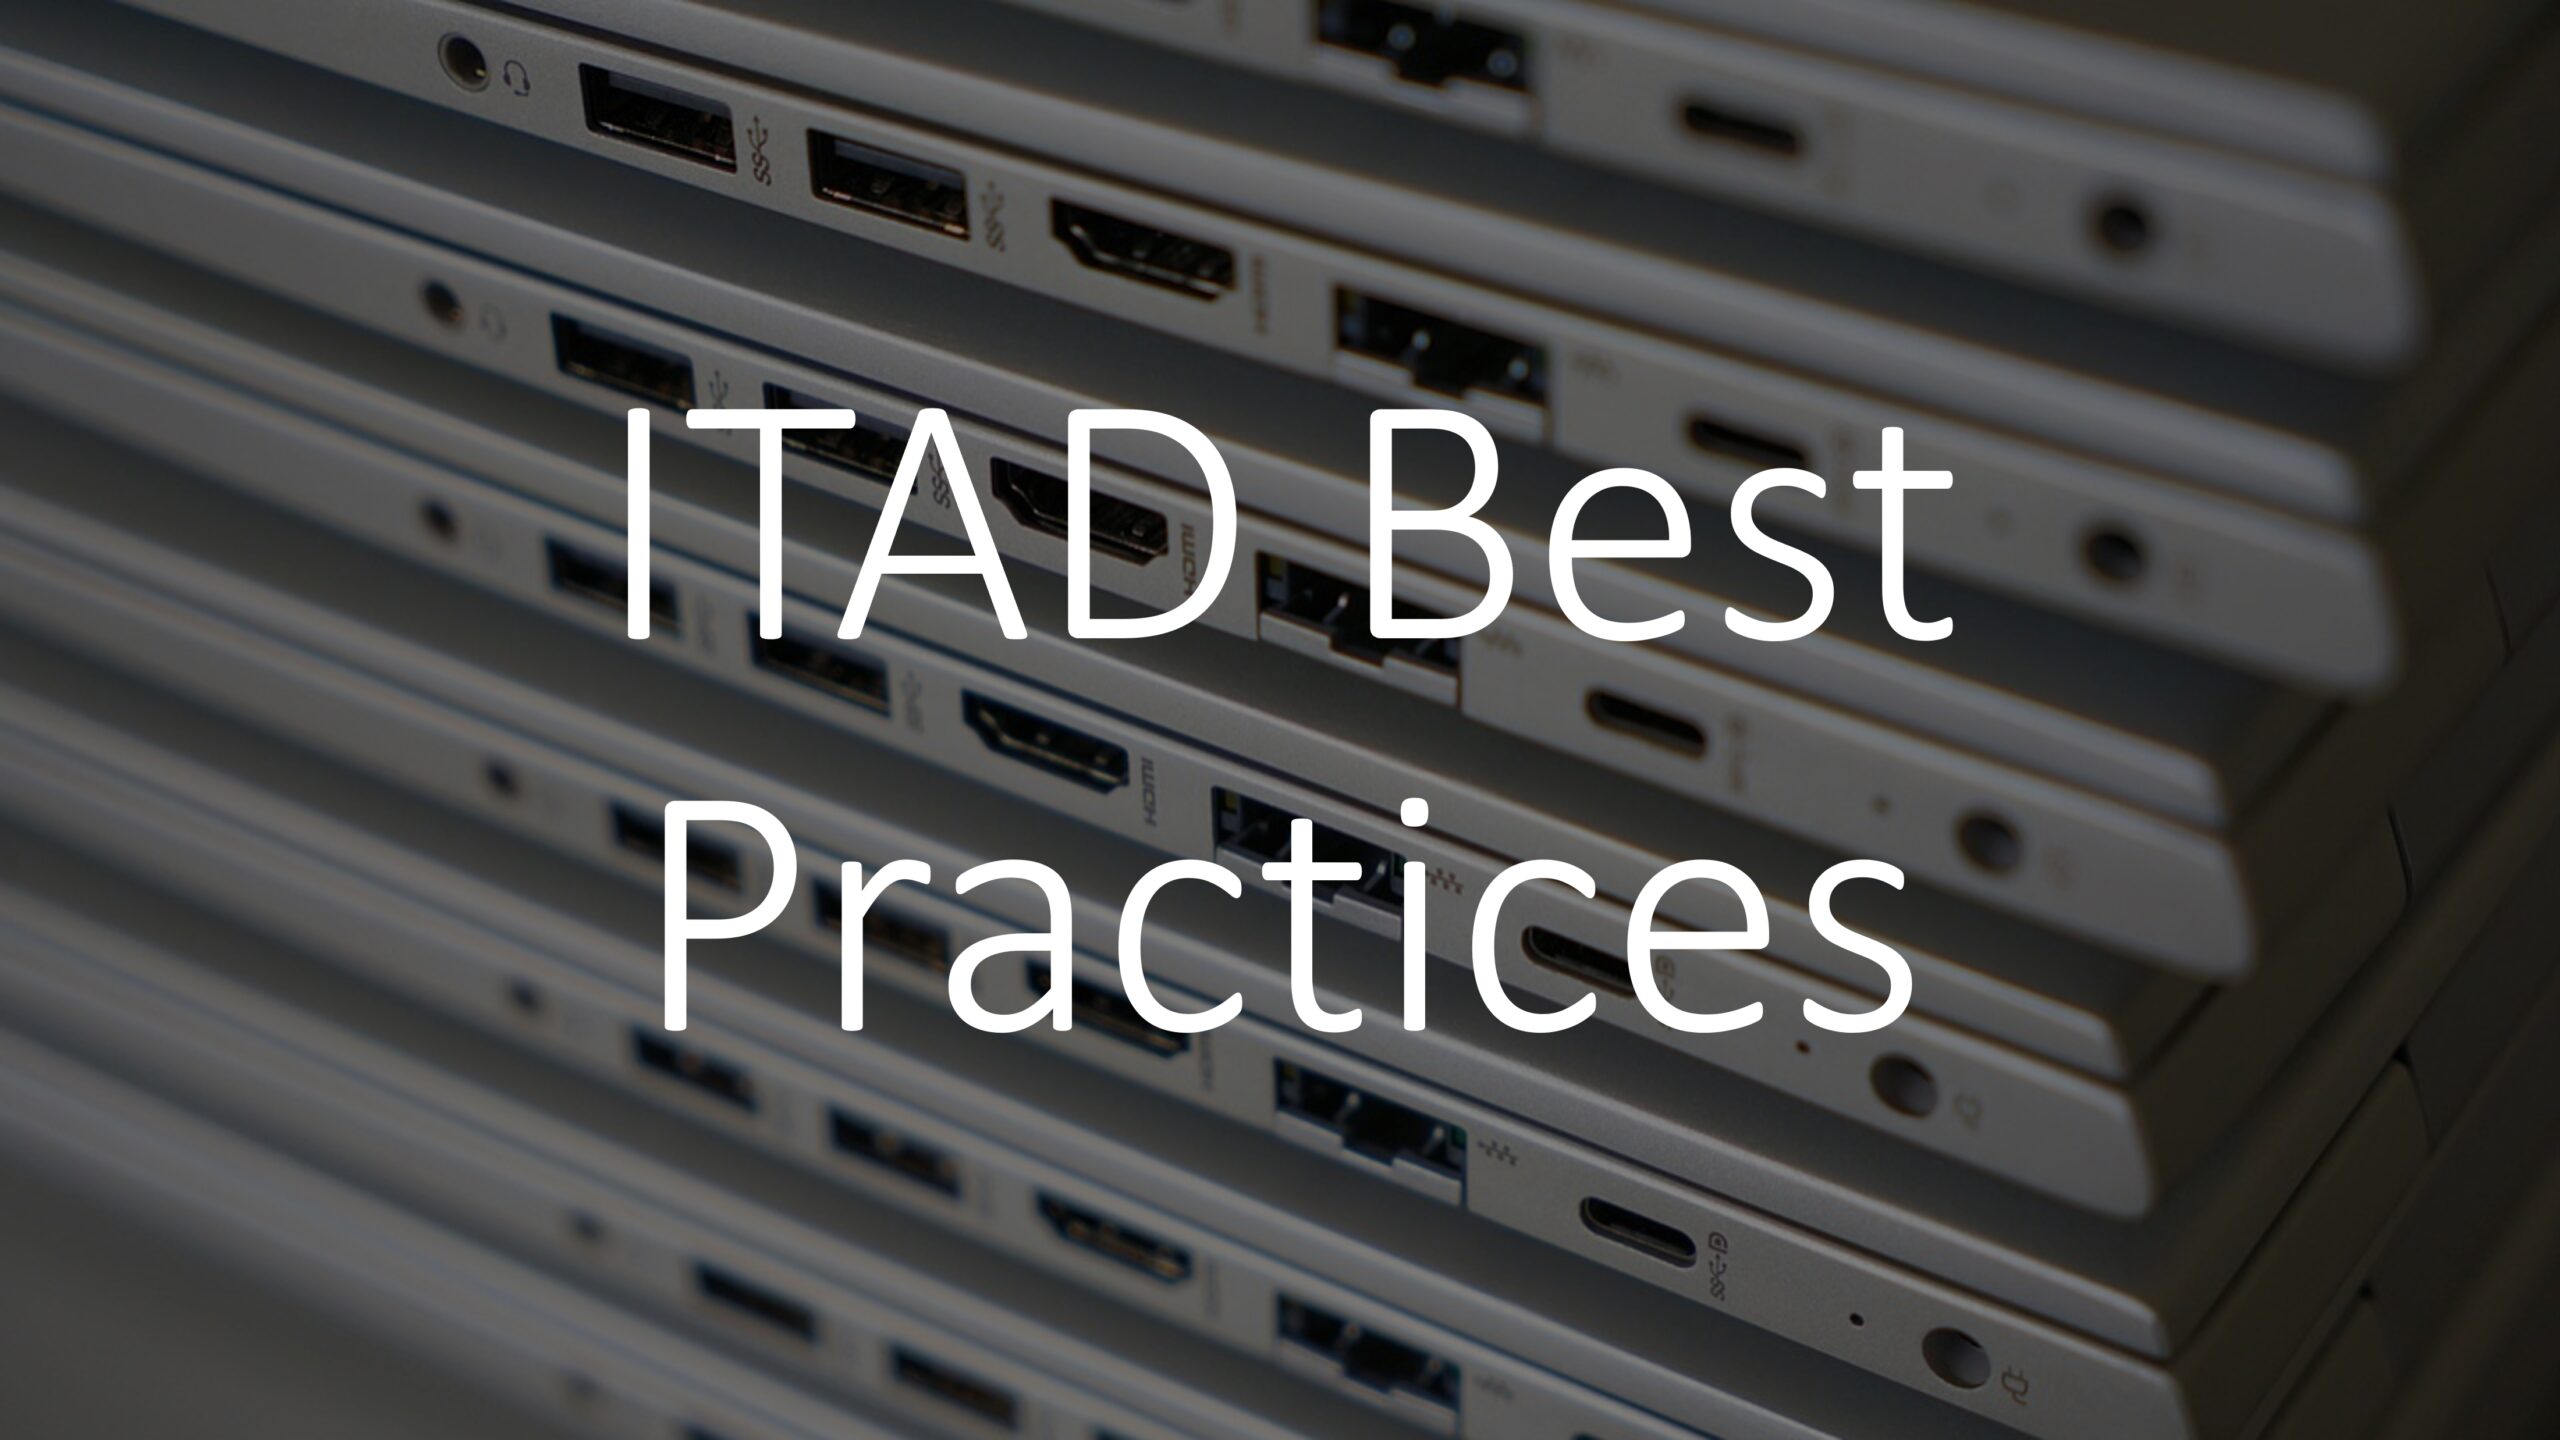 ITAD Best Practices: A Step-by-Step Guide to Efficient IT Asset Disposition